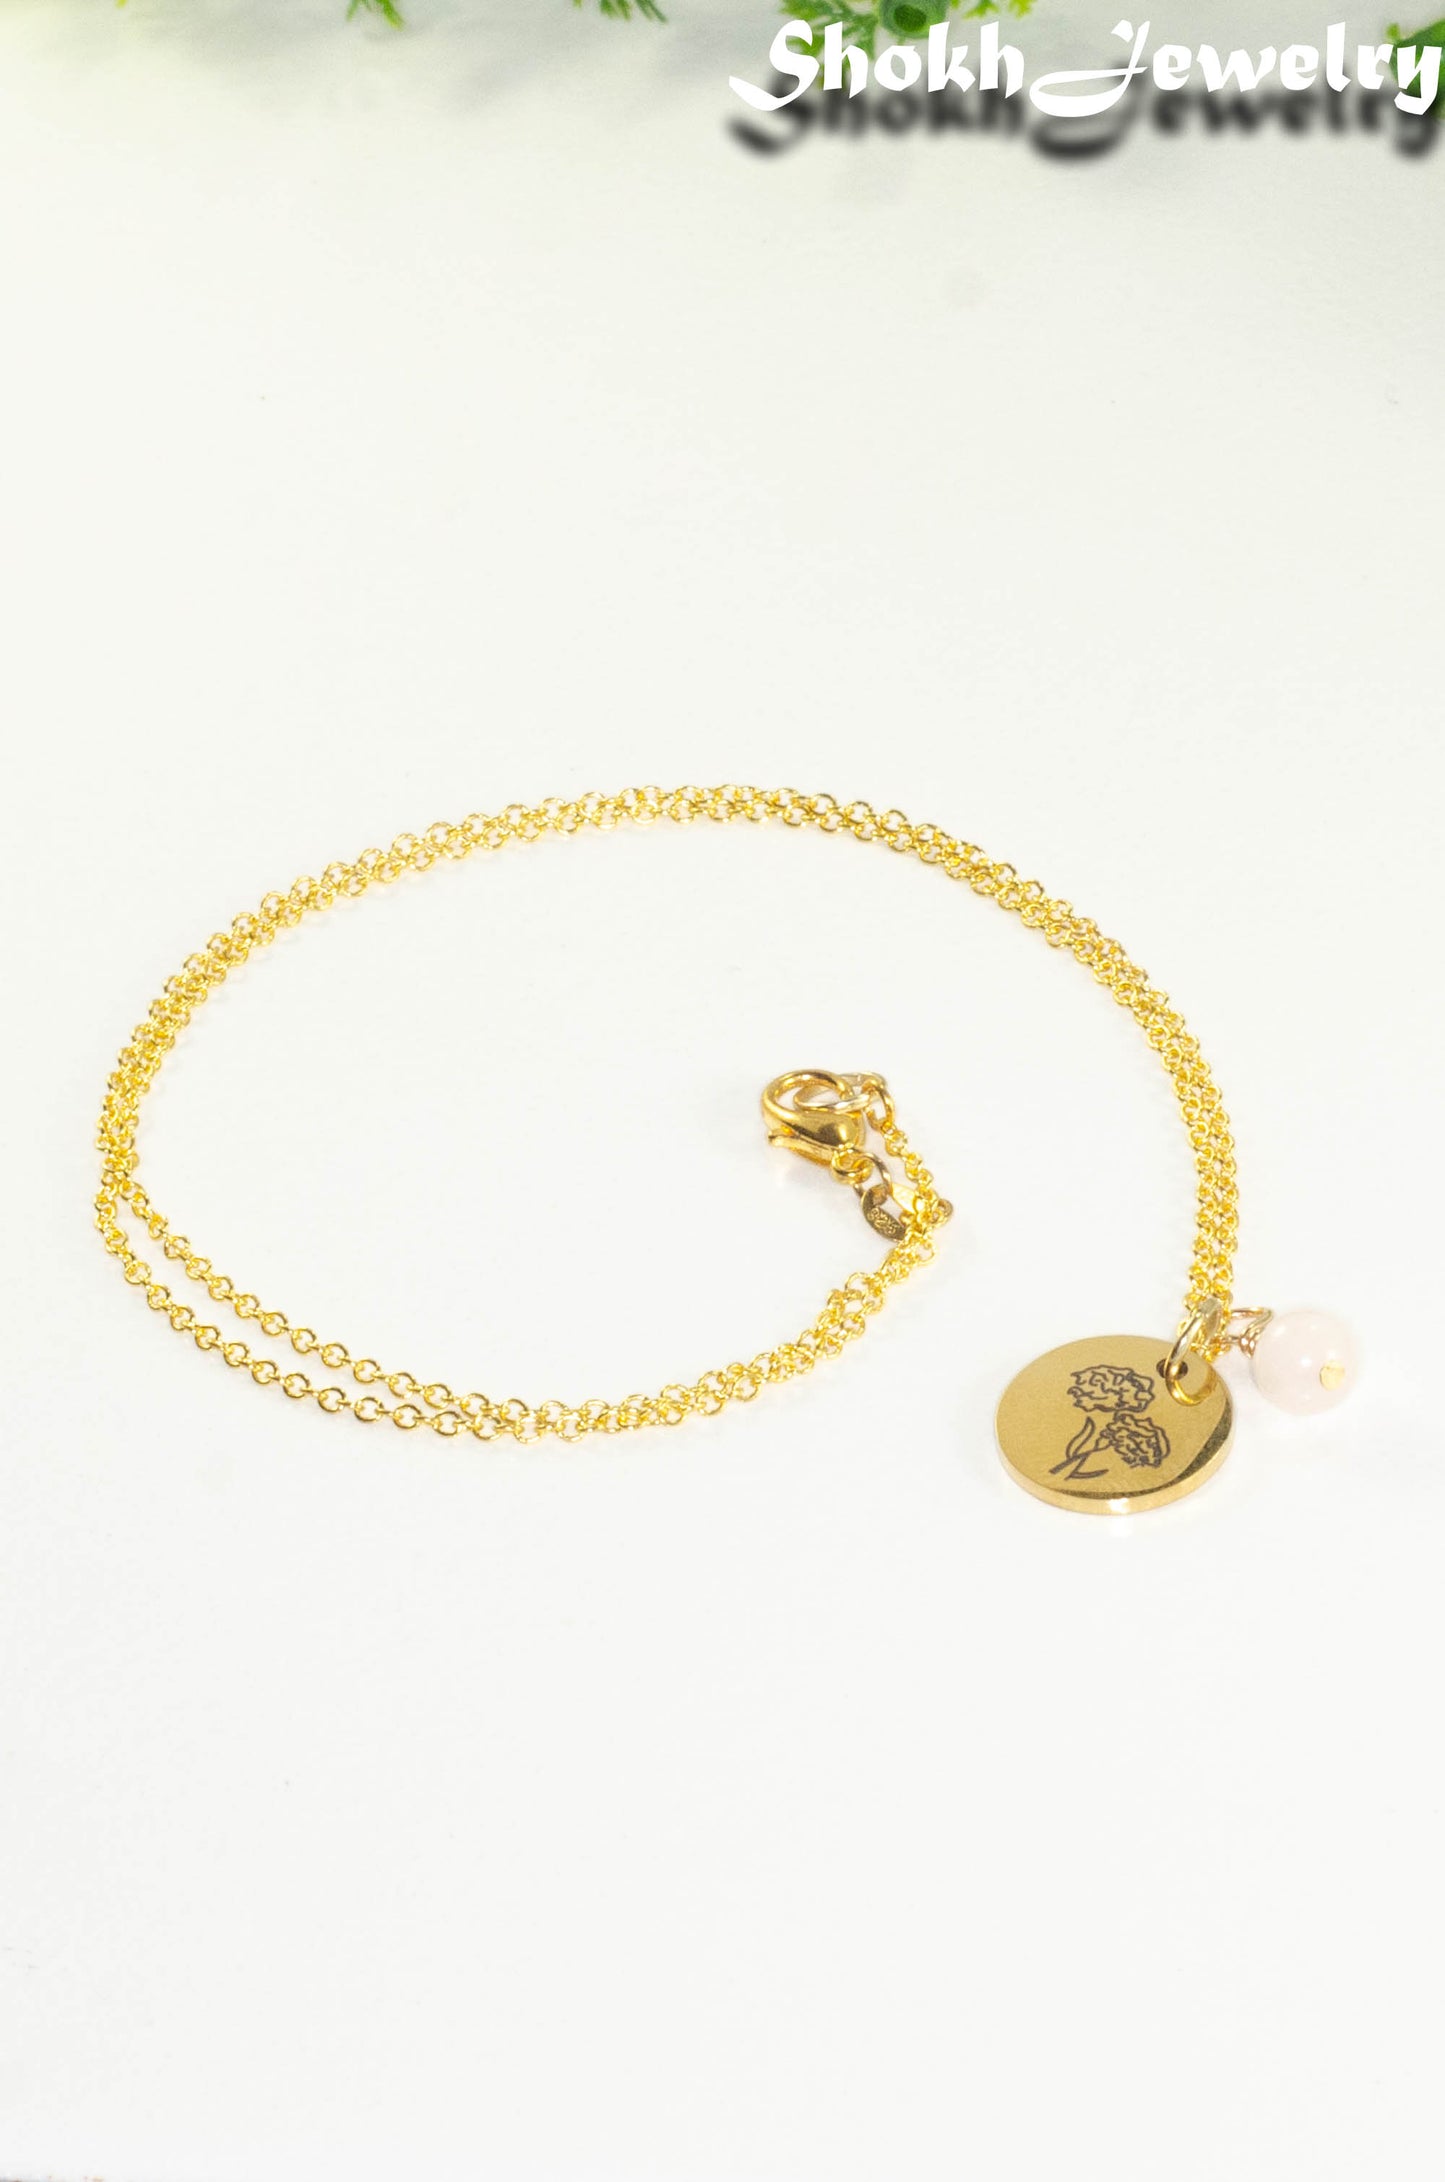 Gold Plated October Birth Flower Necklace with Rose Quartz Birthstone Pendant.